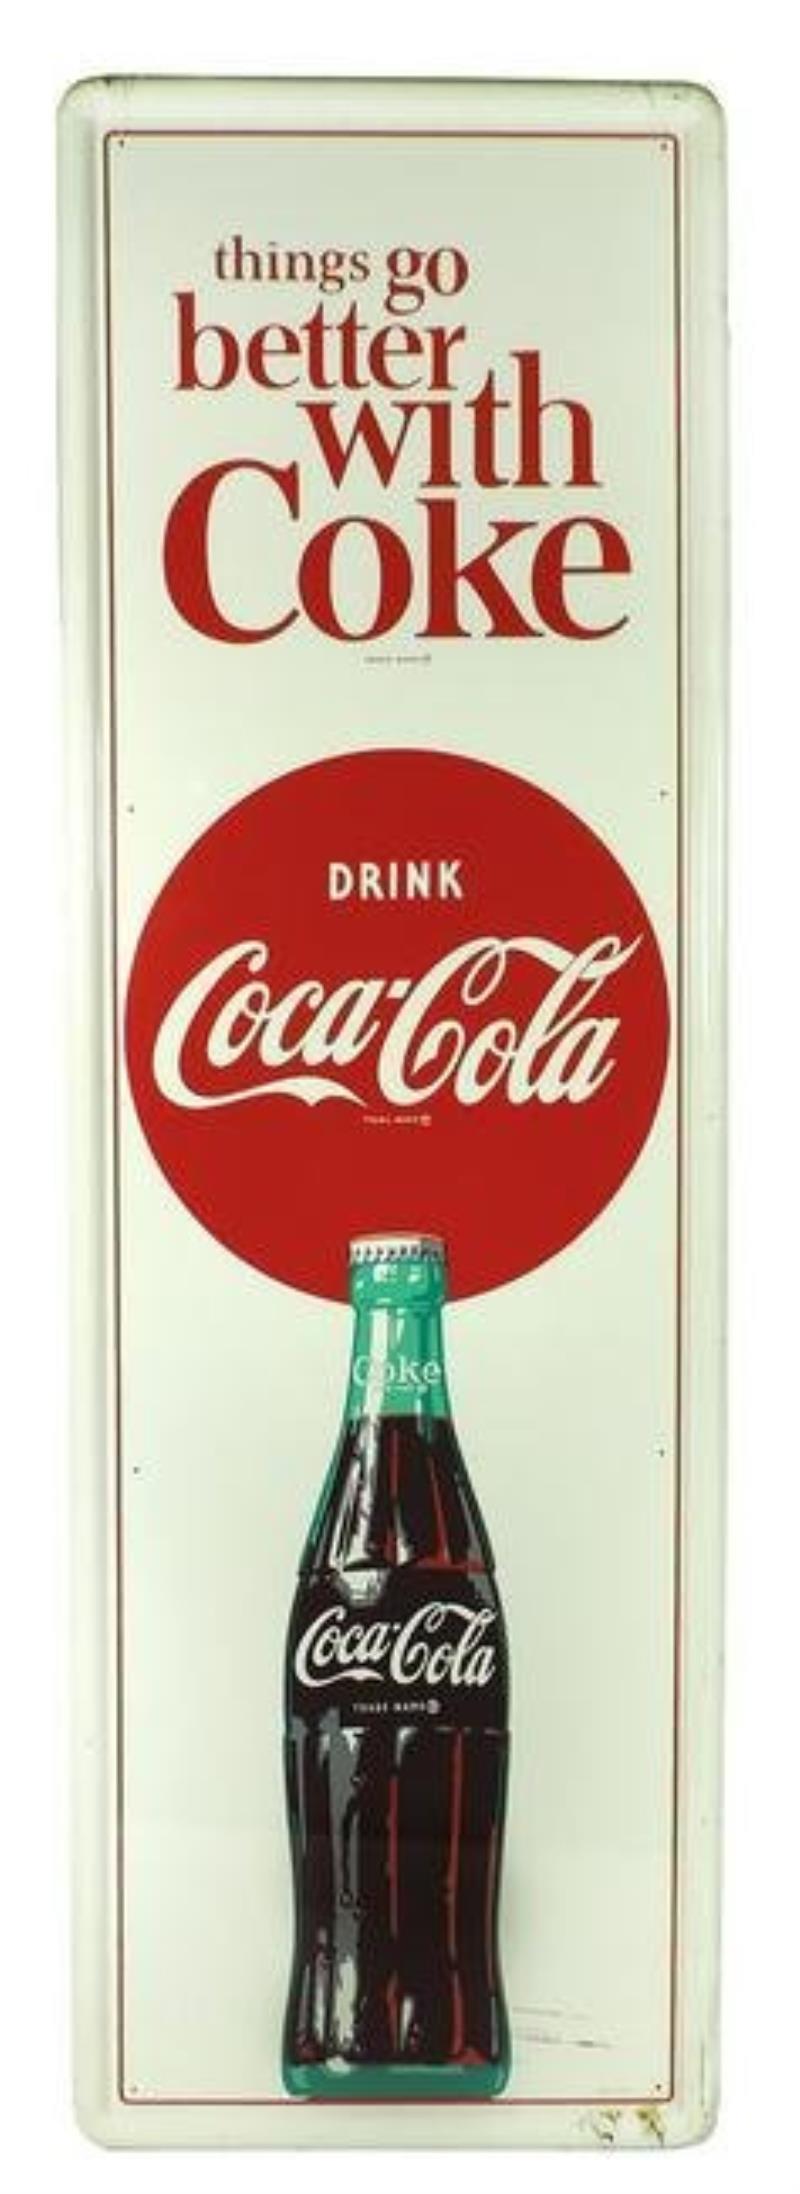 Coca-Cola Sign, "things go better with Coke-Drink